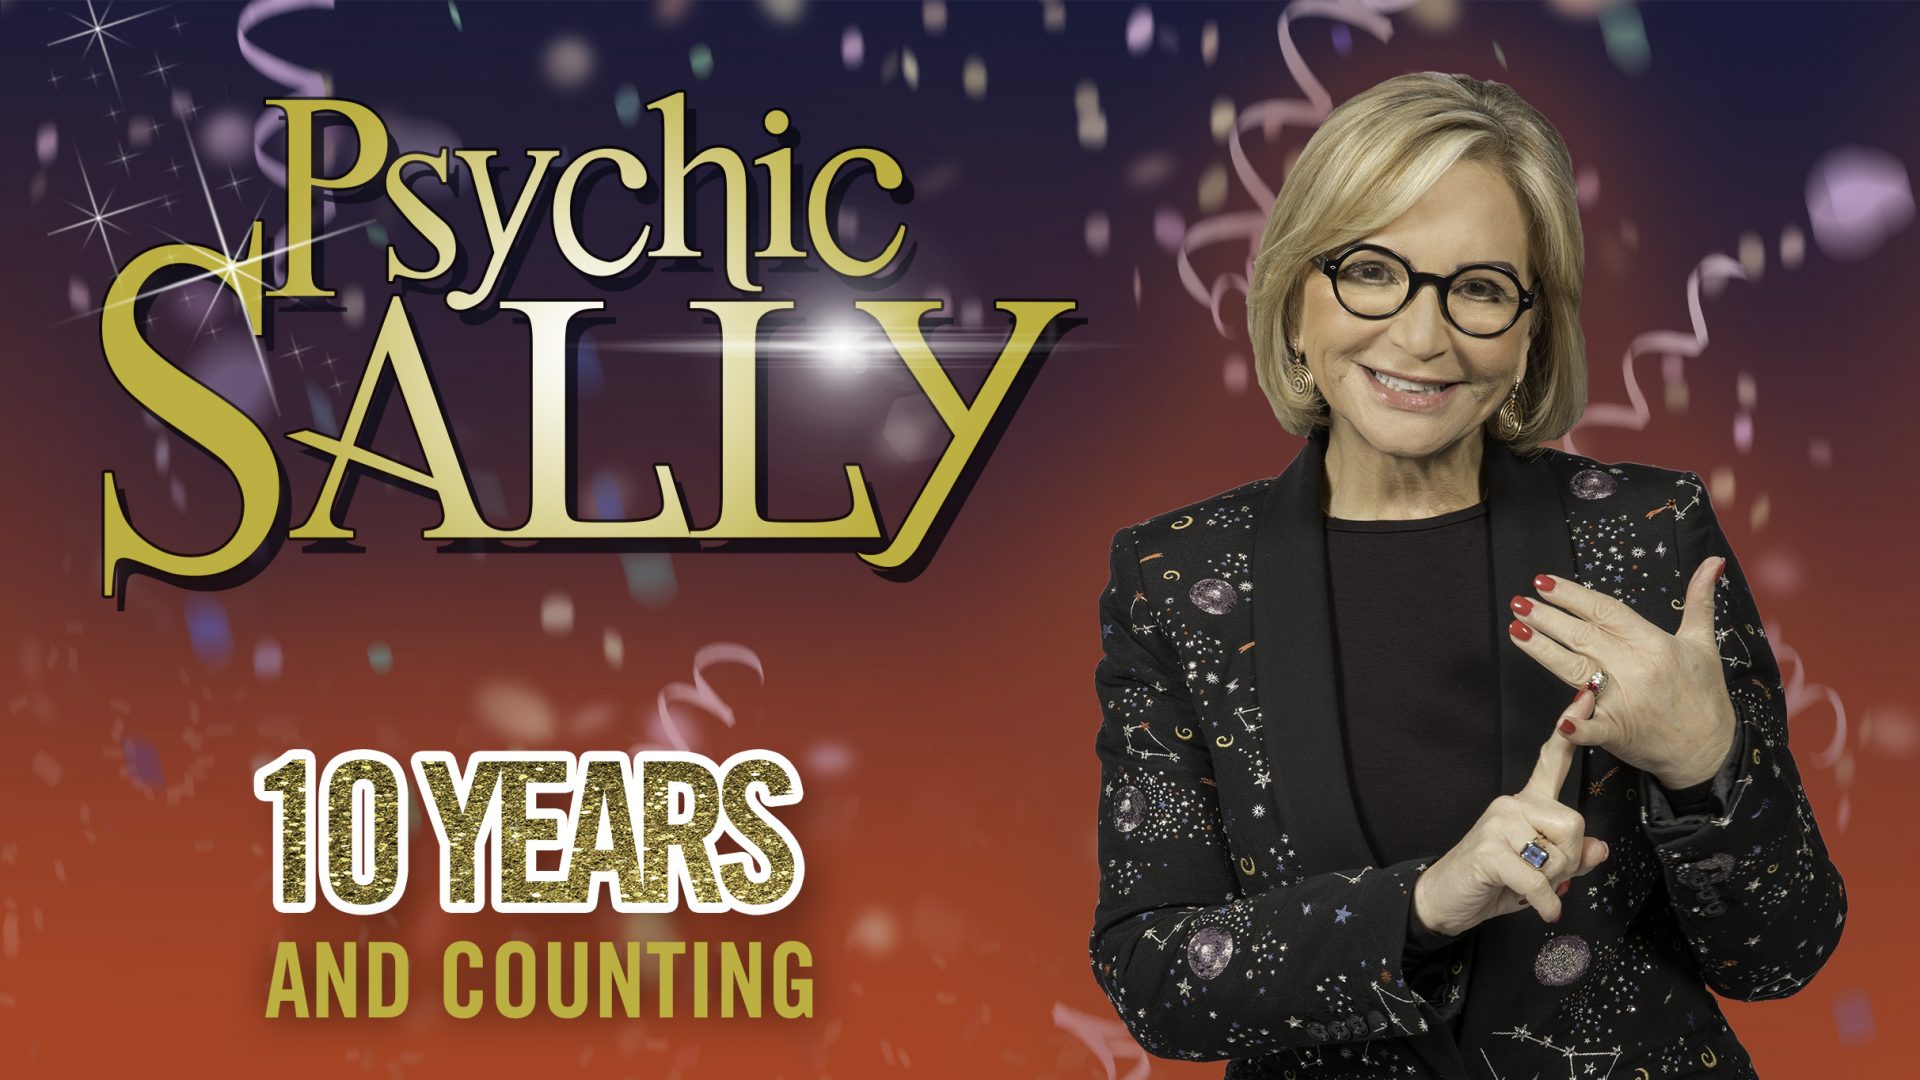 Psychic Sally: 10 Years and Counting&#8230;